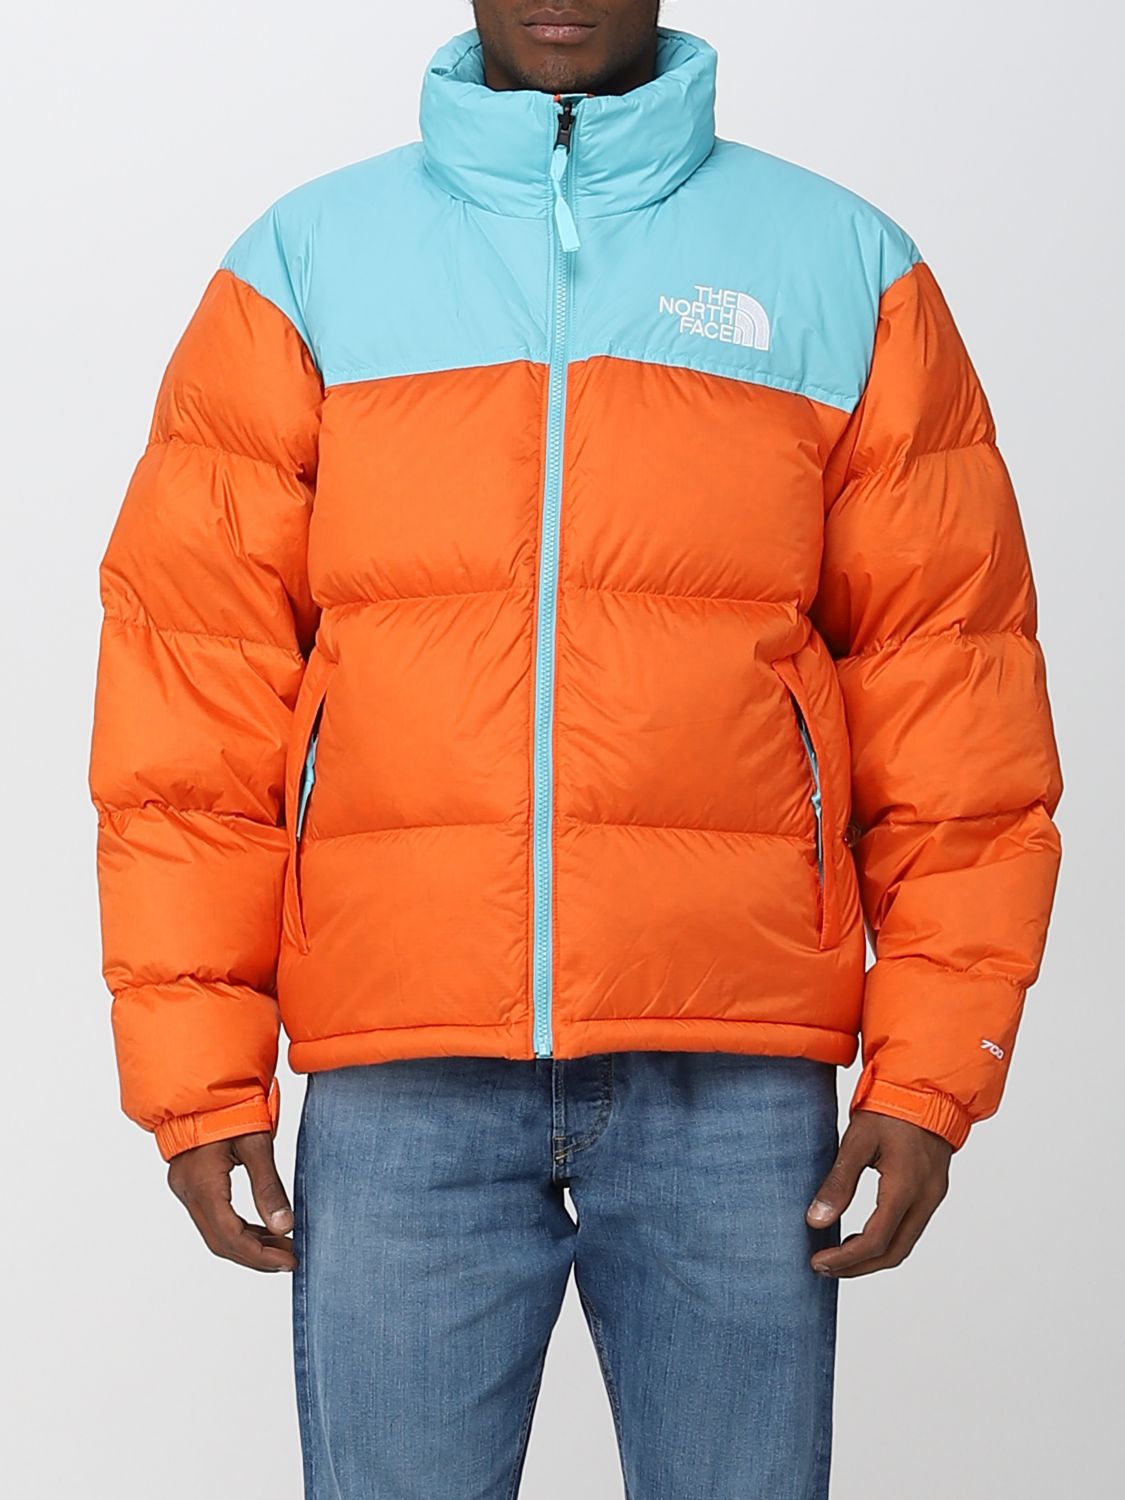 THE NORTH FACE: jacket for men - Orange | The North Face jacket ...